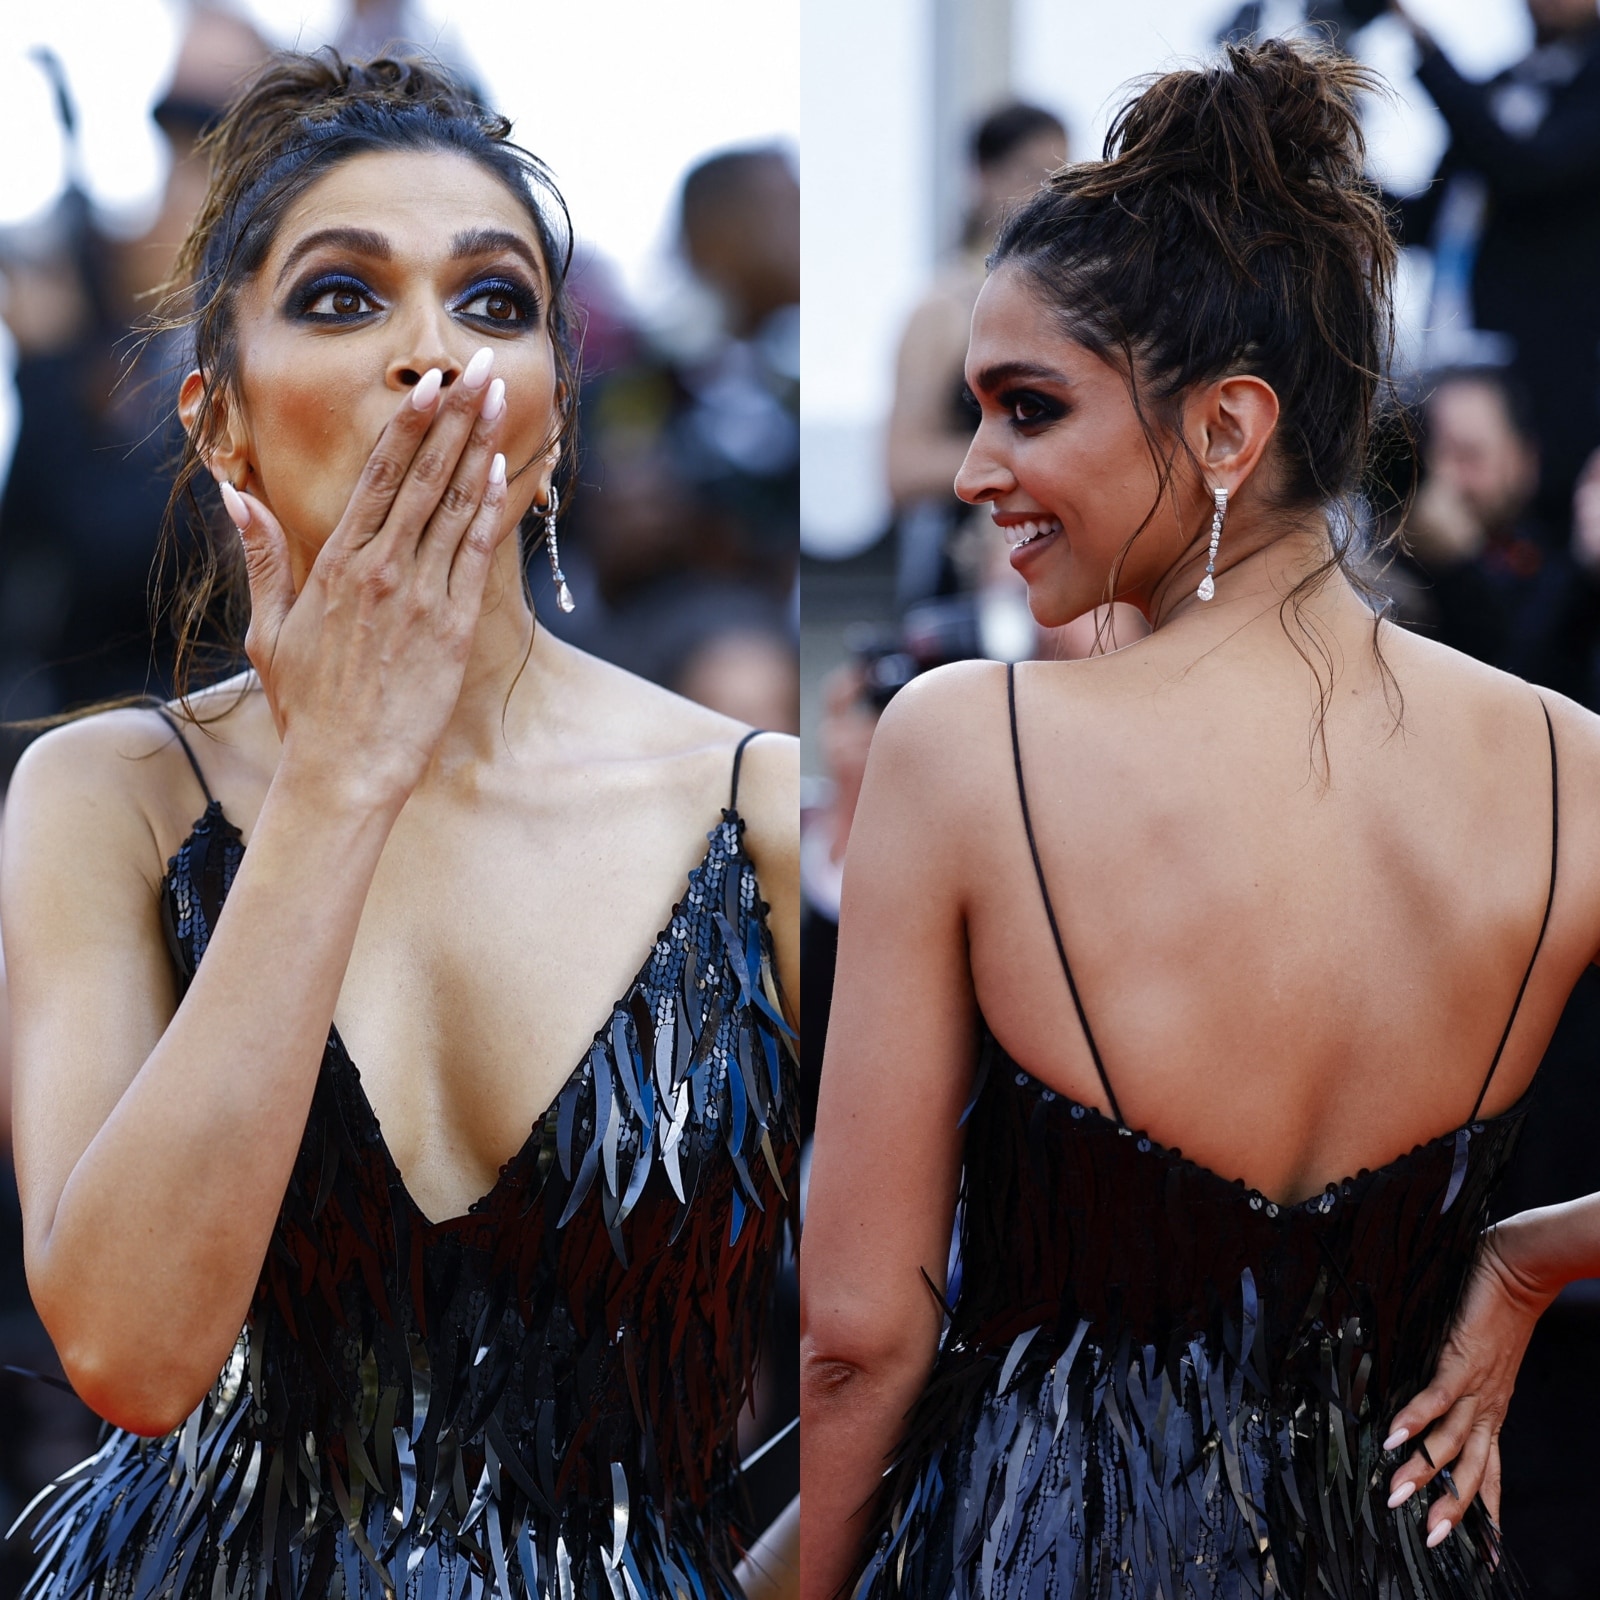 Deepika Ka Sexy Video Xxx - Deepika Padukone Blows Kiss in Super Hot Embellished Gown on Cannes Red  Carpet; See Pics - News18